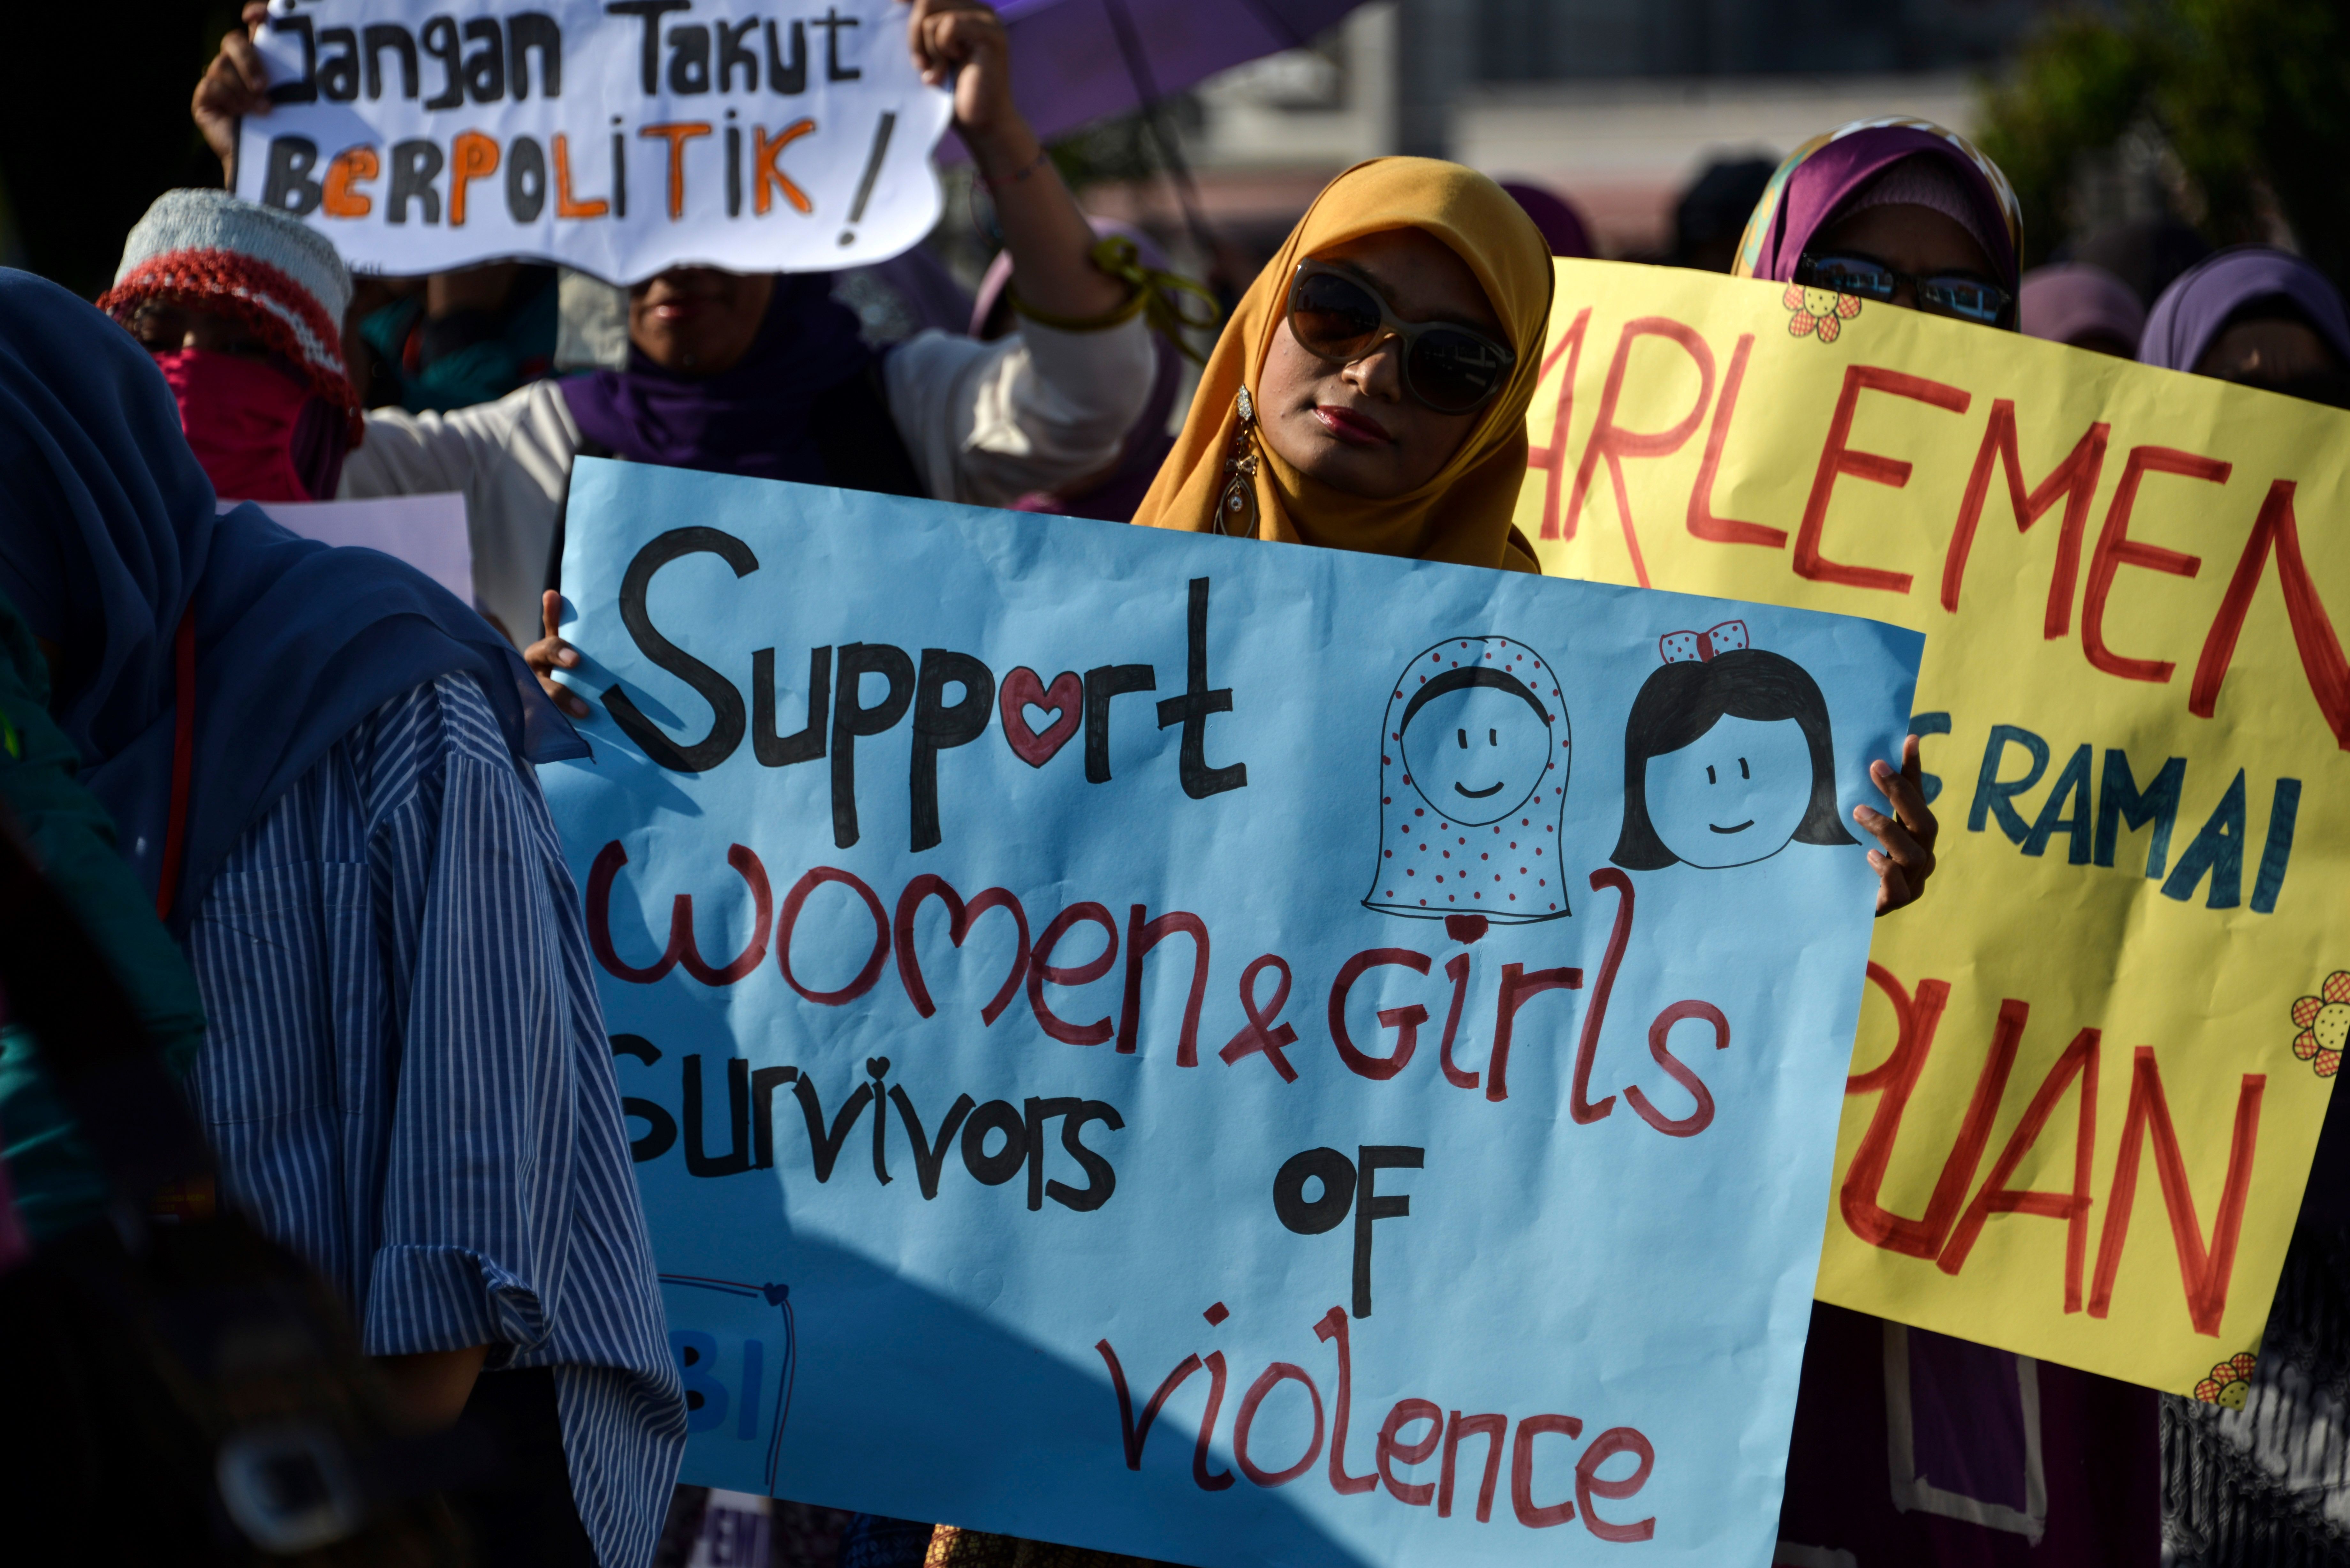 Aceh, public flogging, human rights, women's rights, sexual violence, Sharia, Islam